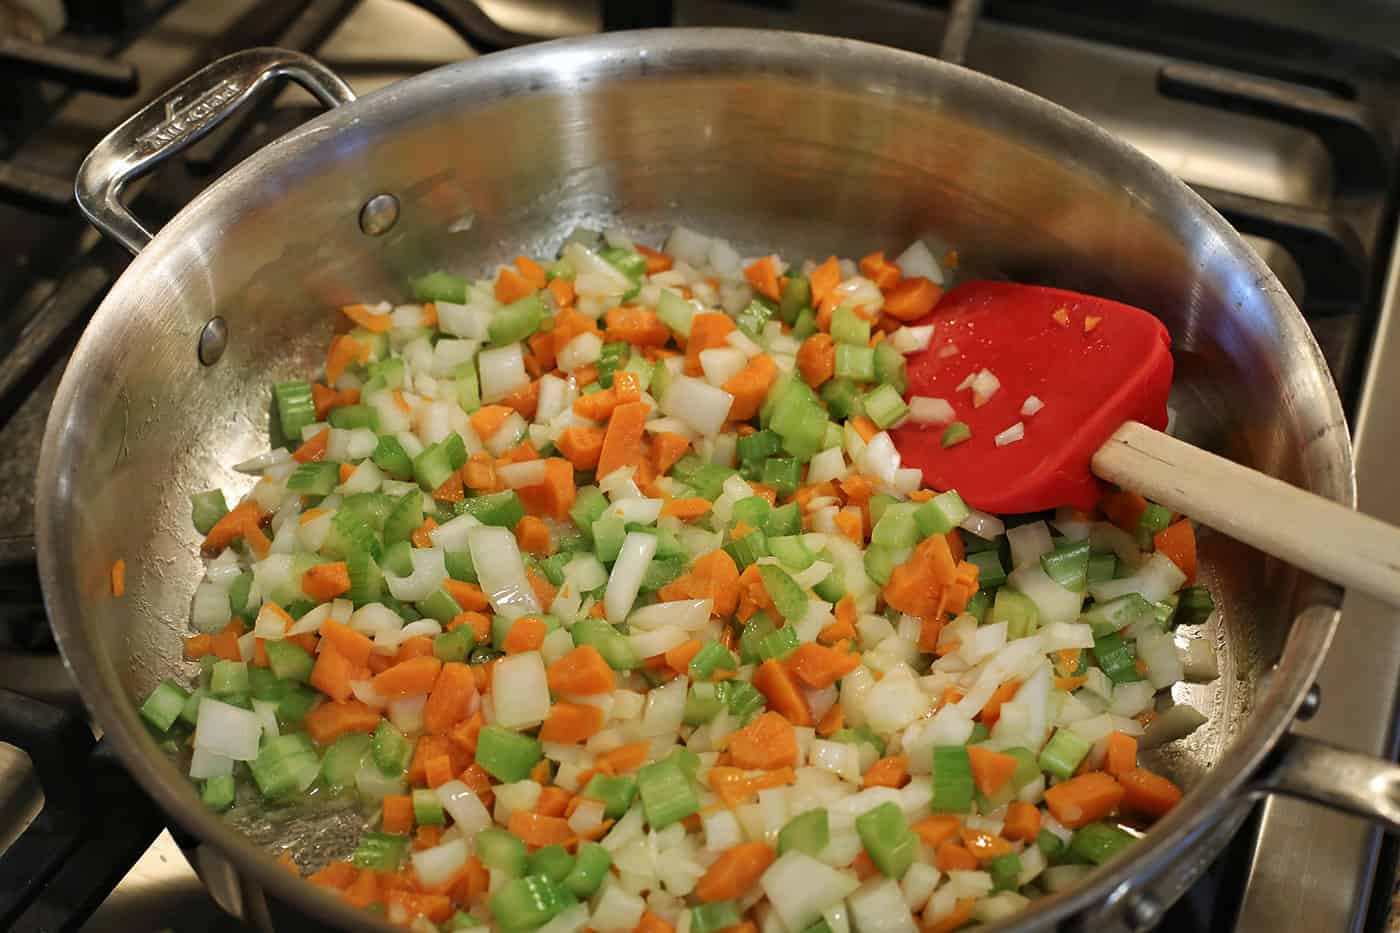 Carrots, celery and onion being sauteed